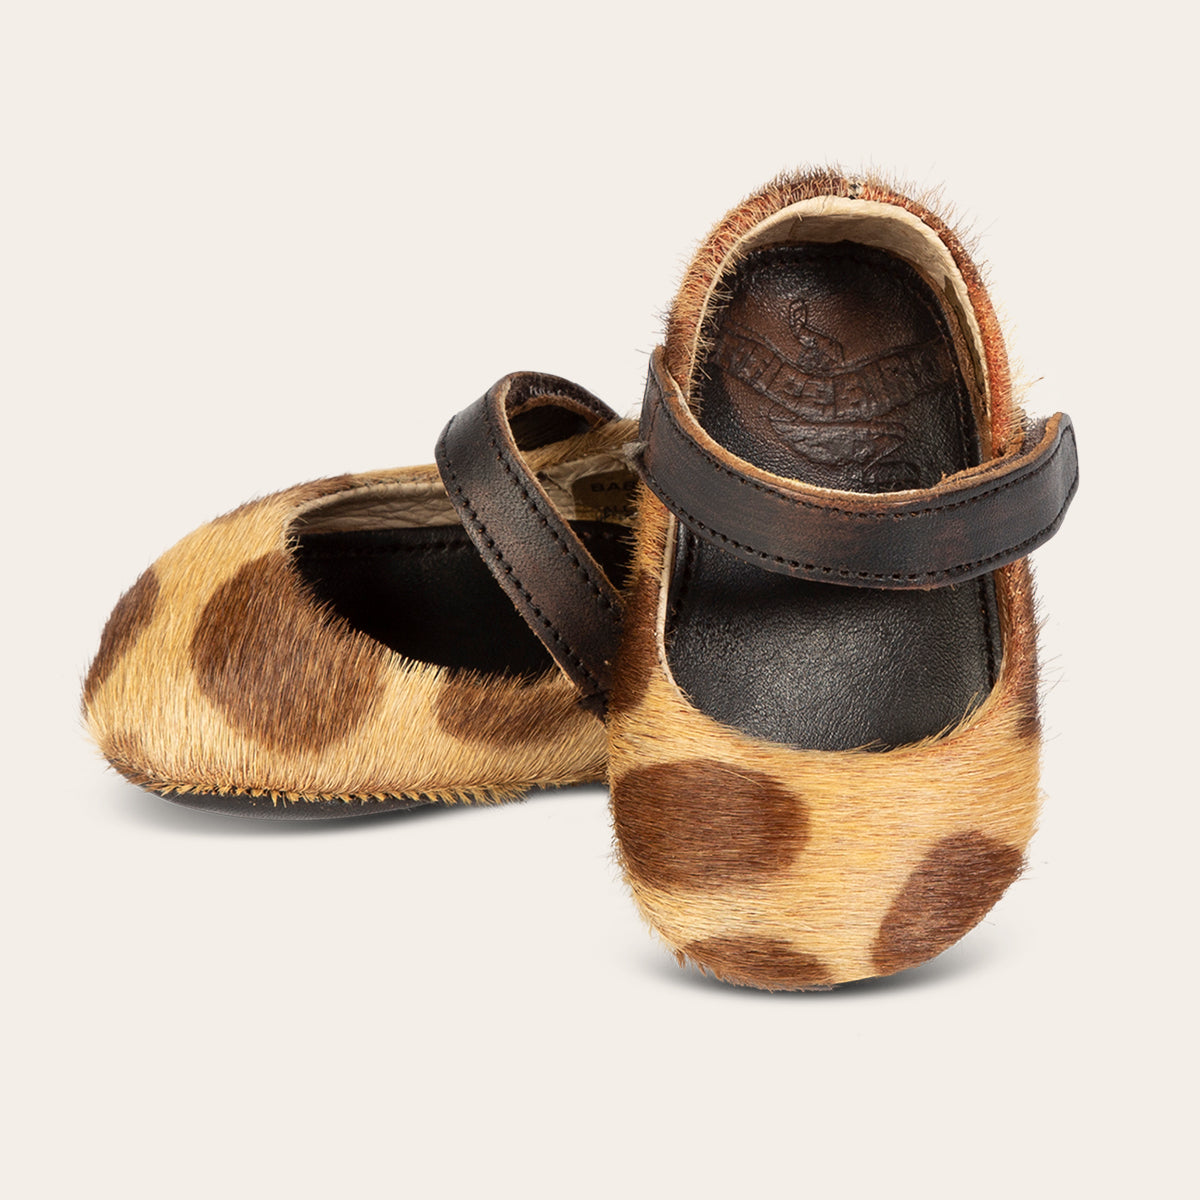 front view showing top leather strap on FREEBIRD infant baby Jane leopard leather shoe